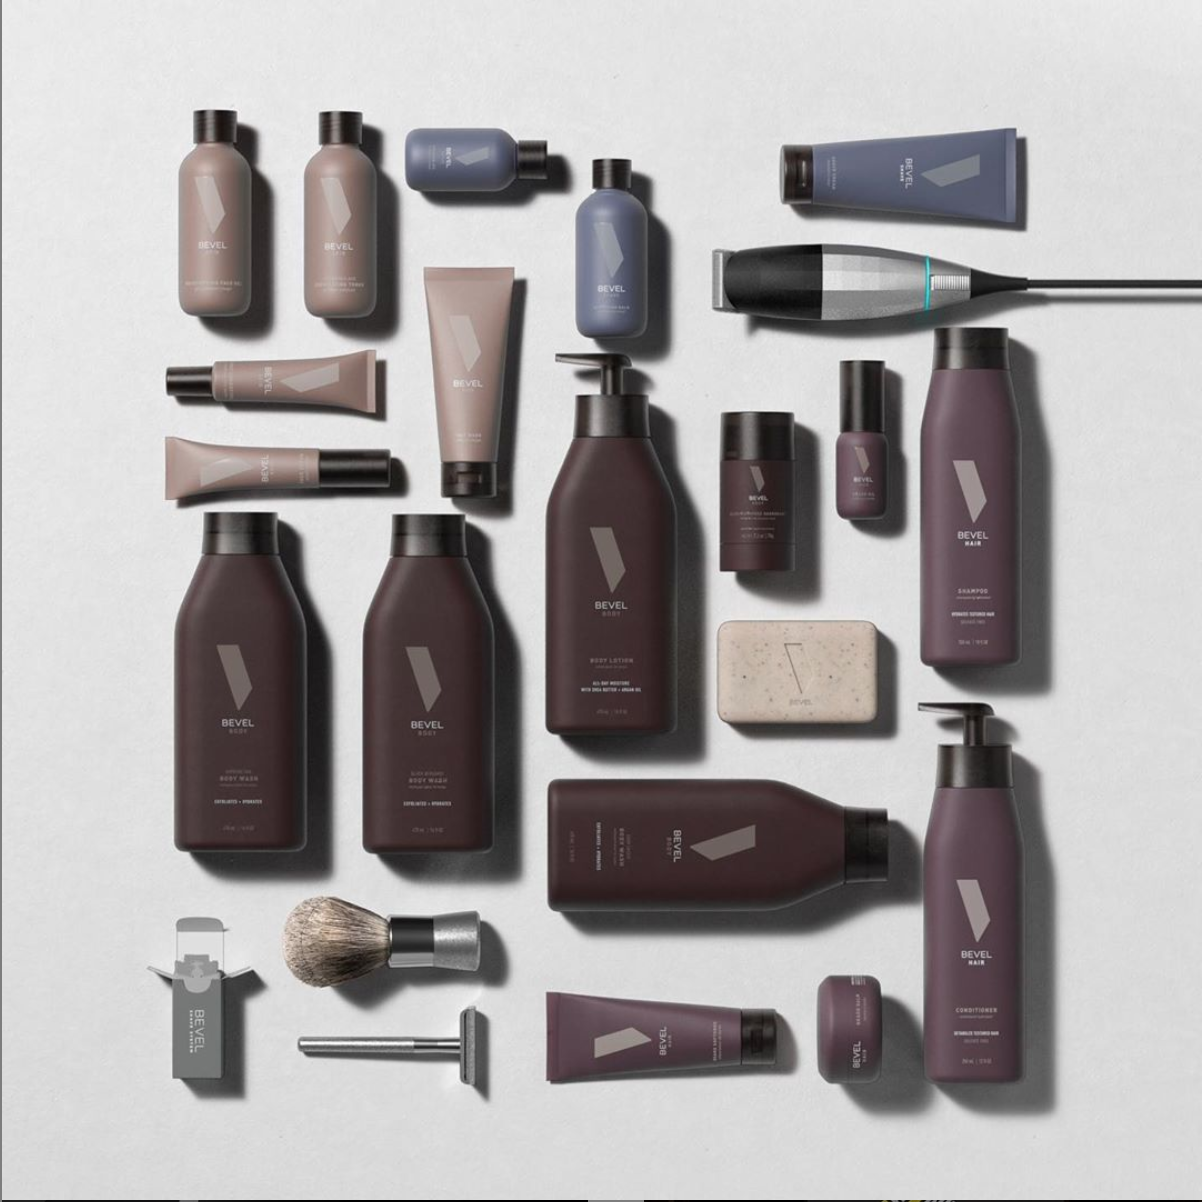 Walker and Company Expands BEVEL Product Line For Black Men